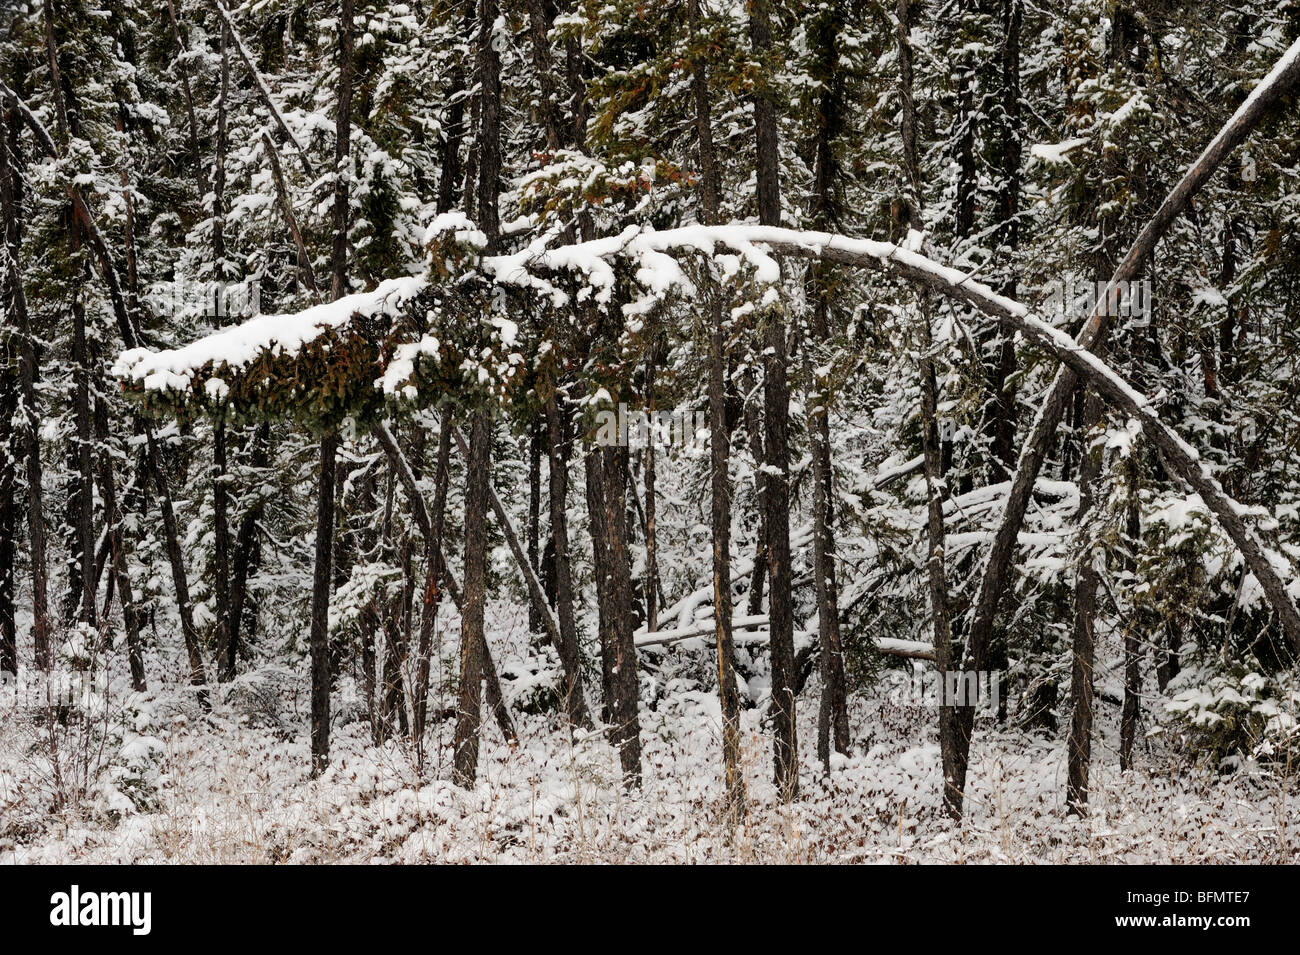 Fresh snow on conifer trees in early winter, Pisew Falls Provincial Park, Manitoba, Canada Stock Photo